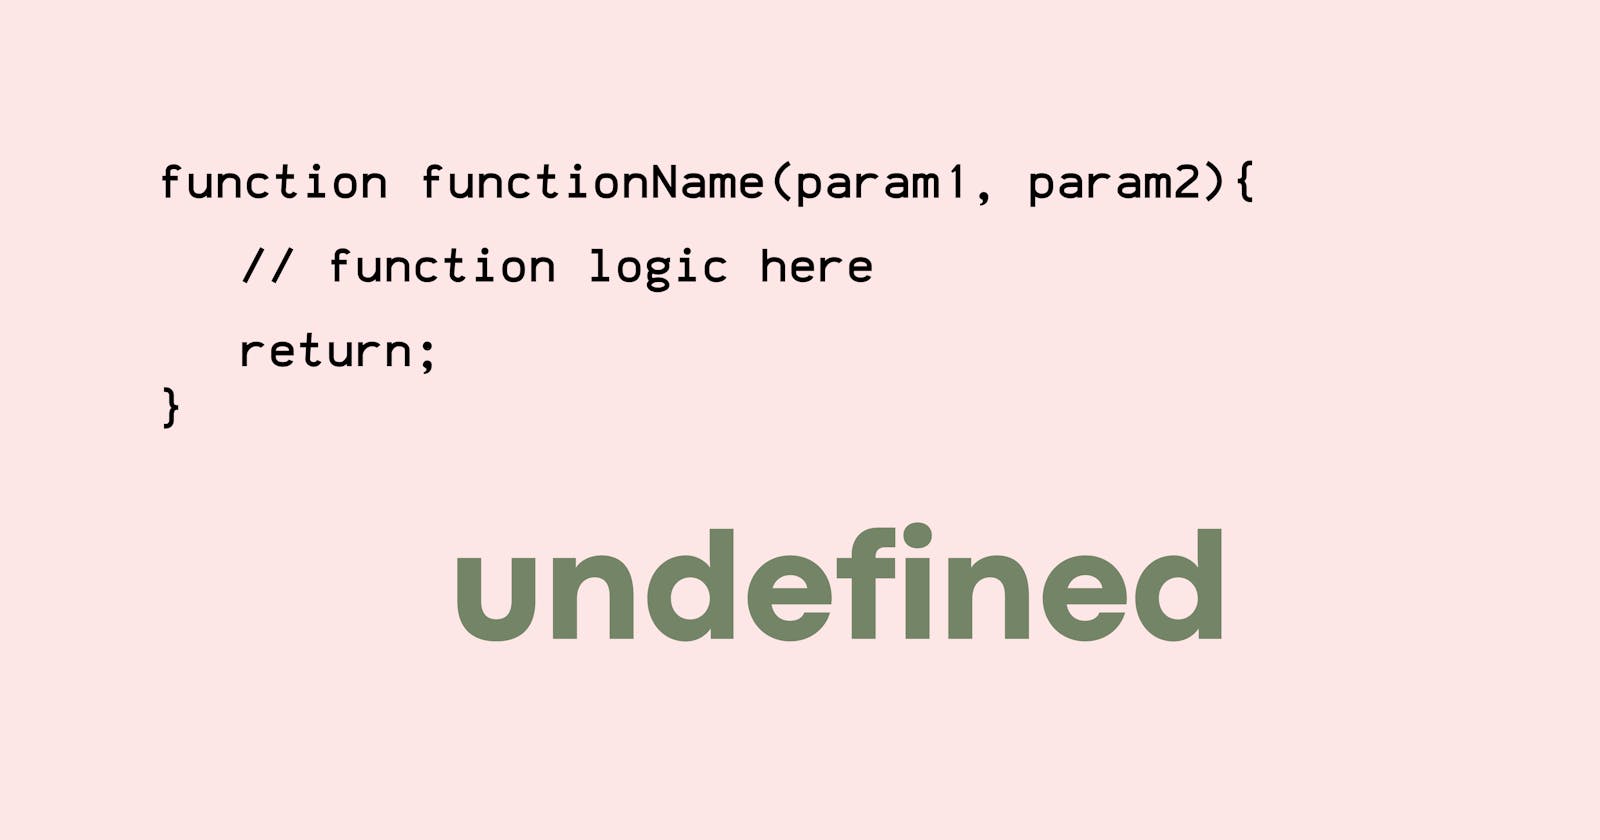 Why do functions return undefined?